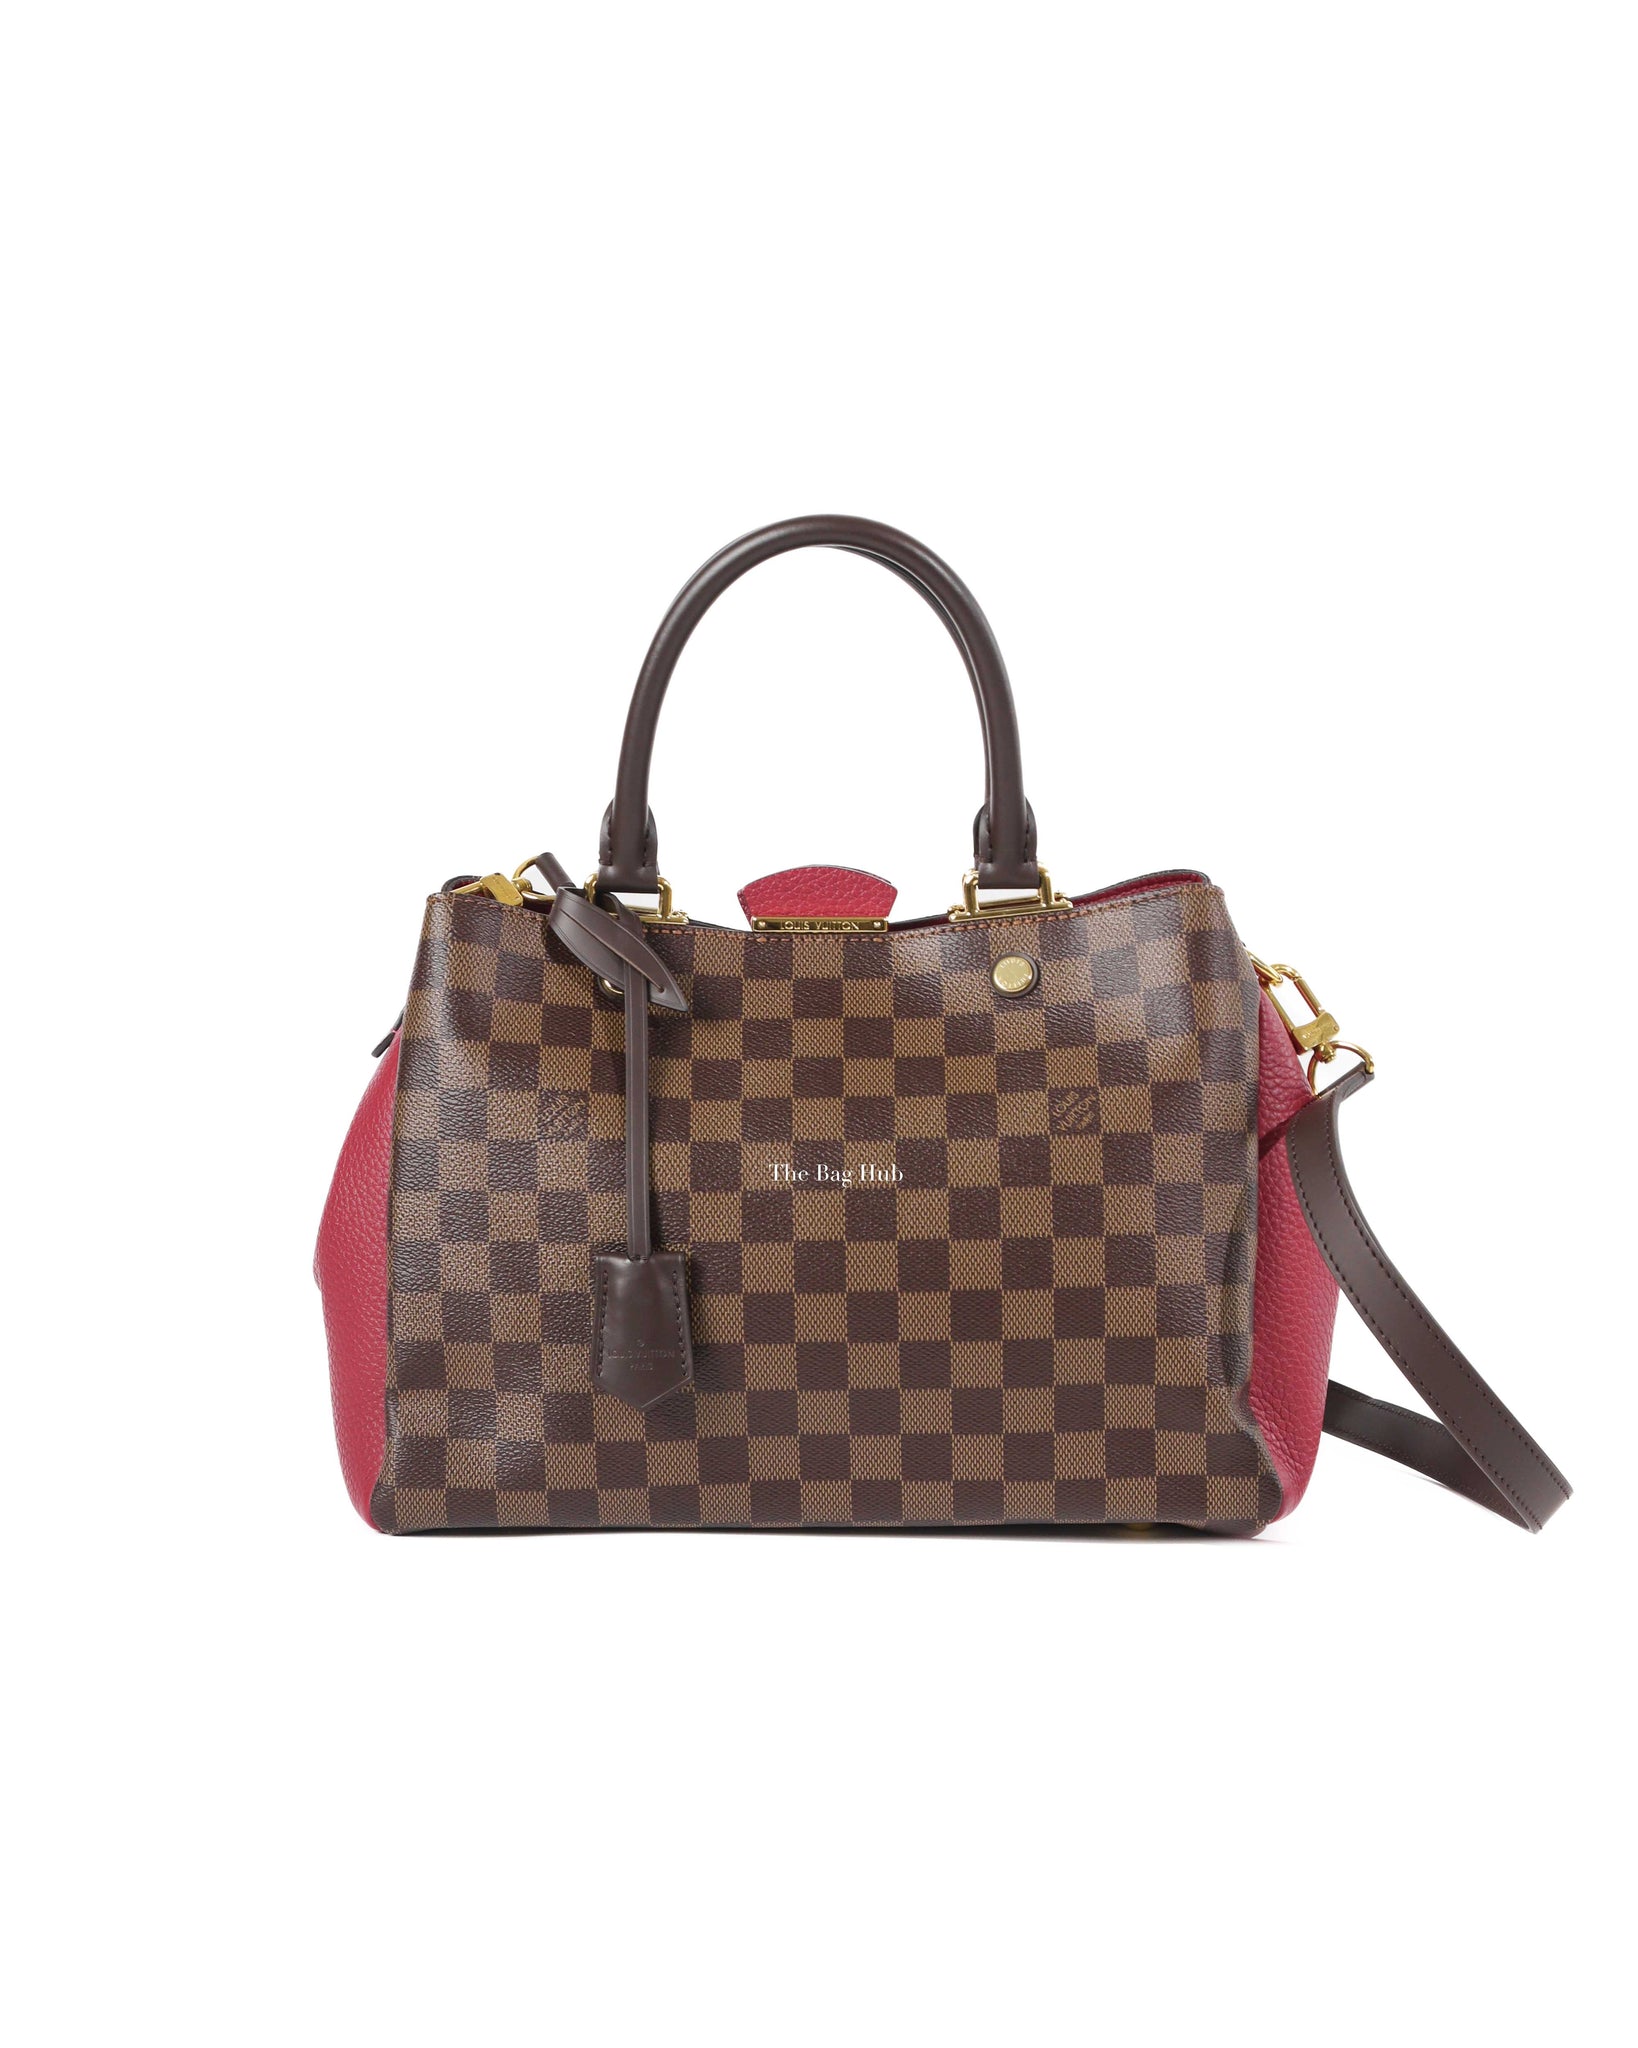 brittany bag louis vuittons